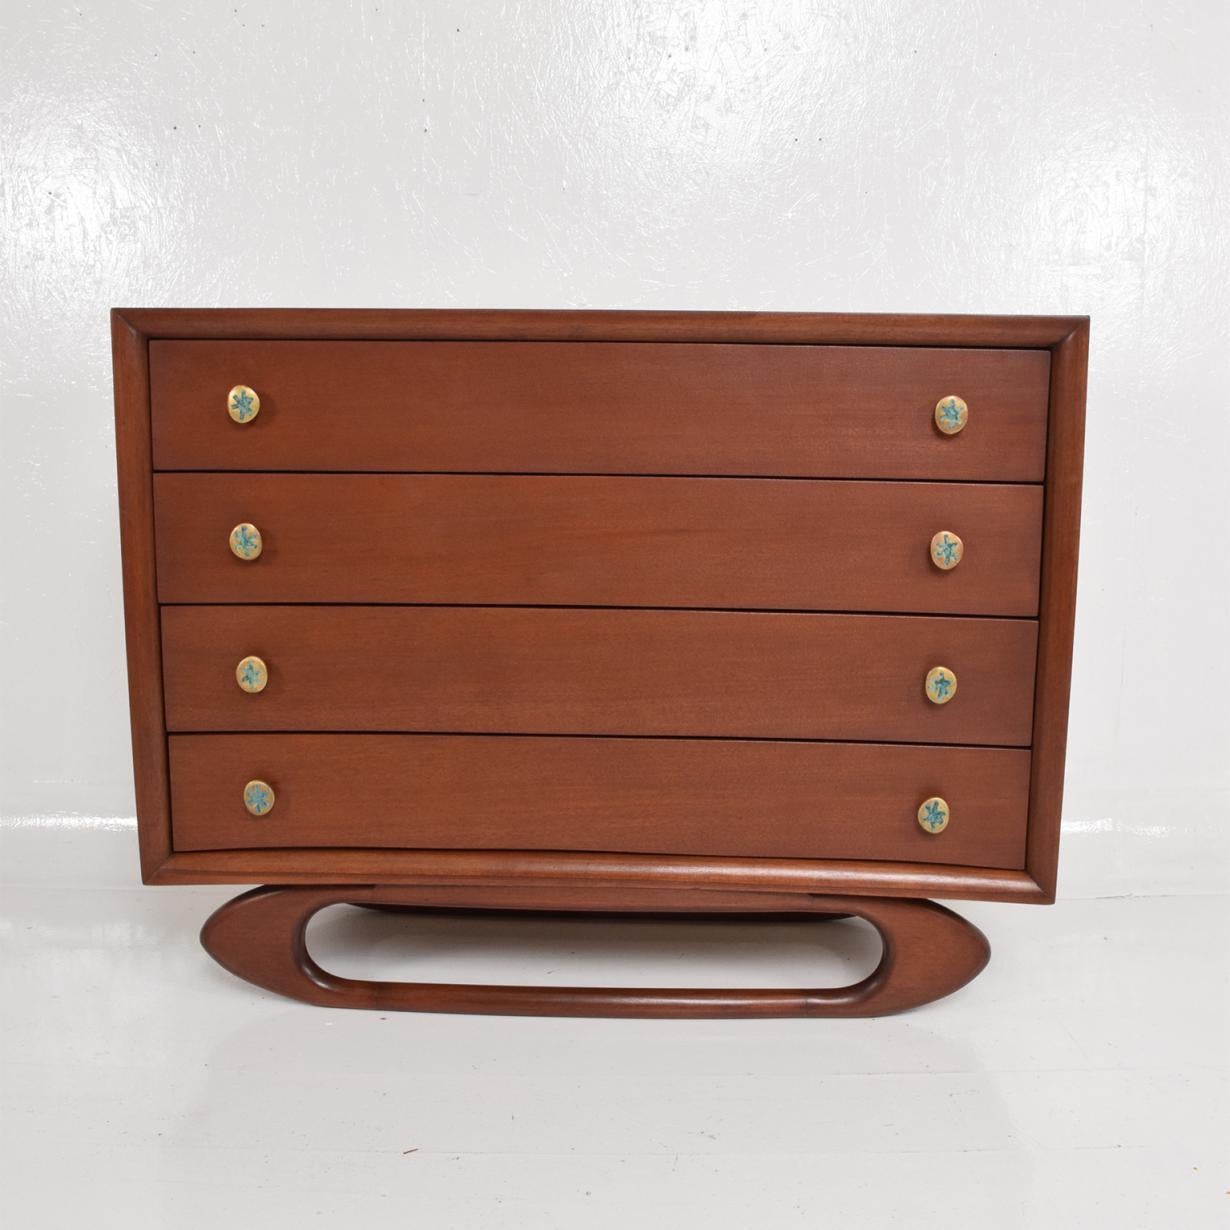 Midcentury Mexican Modernist Chest of Drawers Dresser Frank Kyle Pepe Mendoza 1